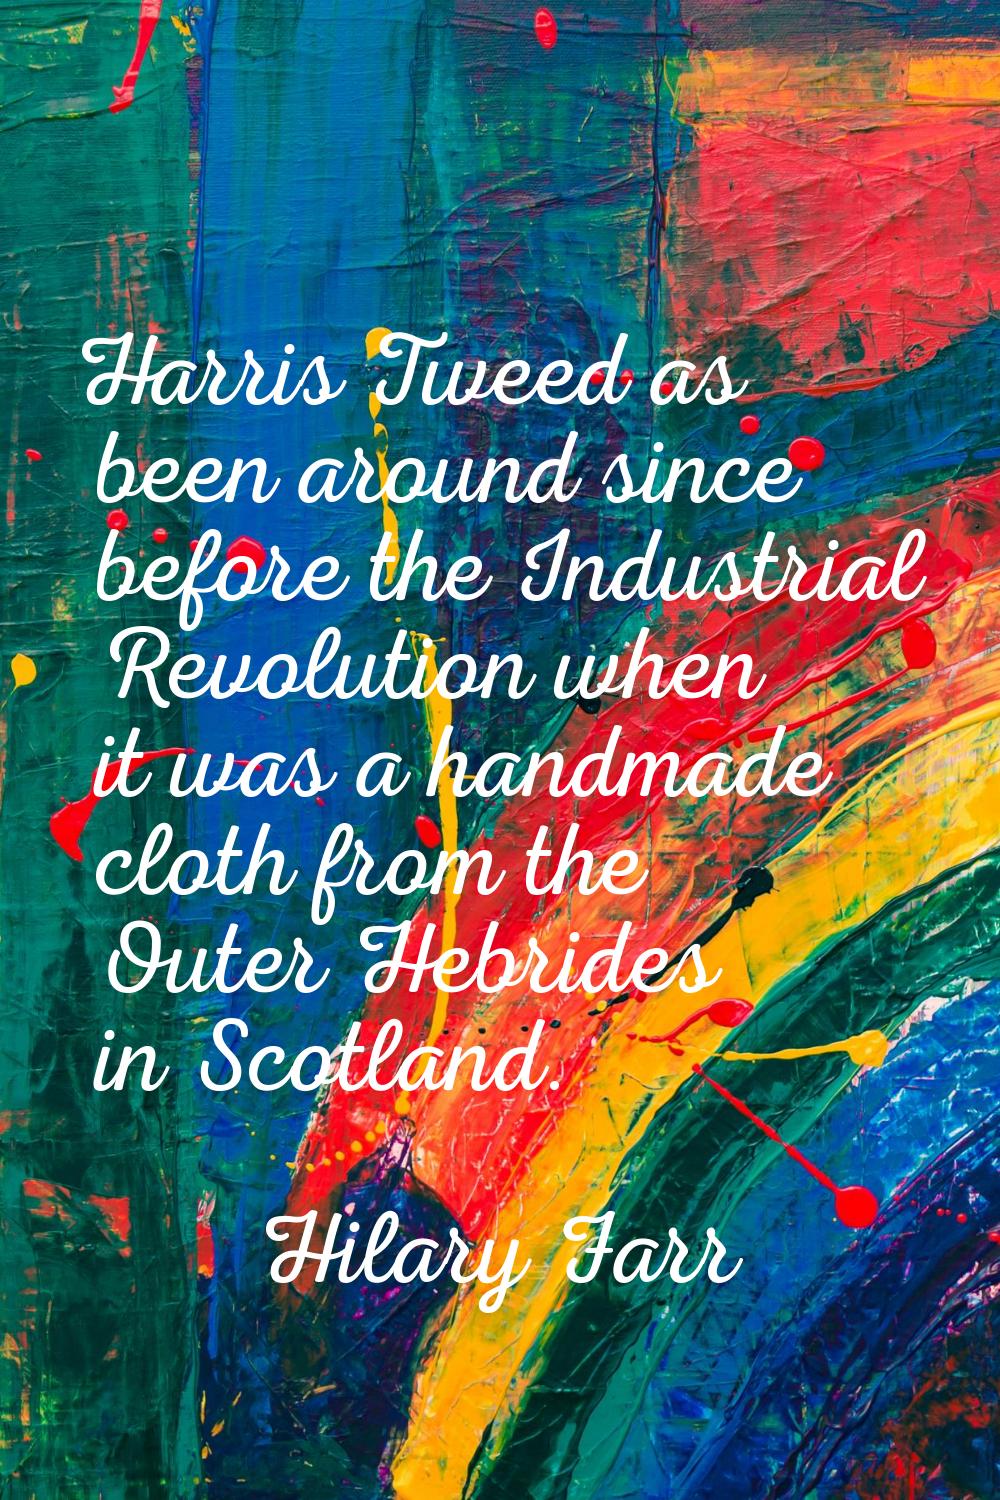 Harris Tweed as been around since before the Industrial Revolution when it was a handmade cloth fro